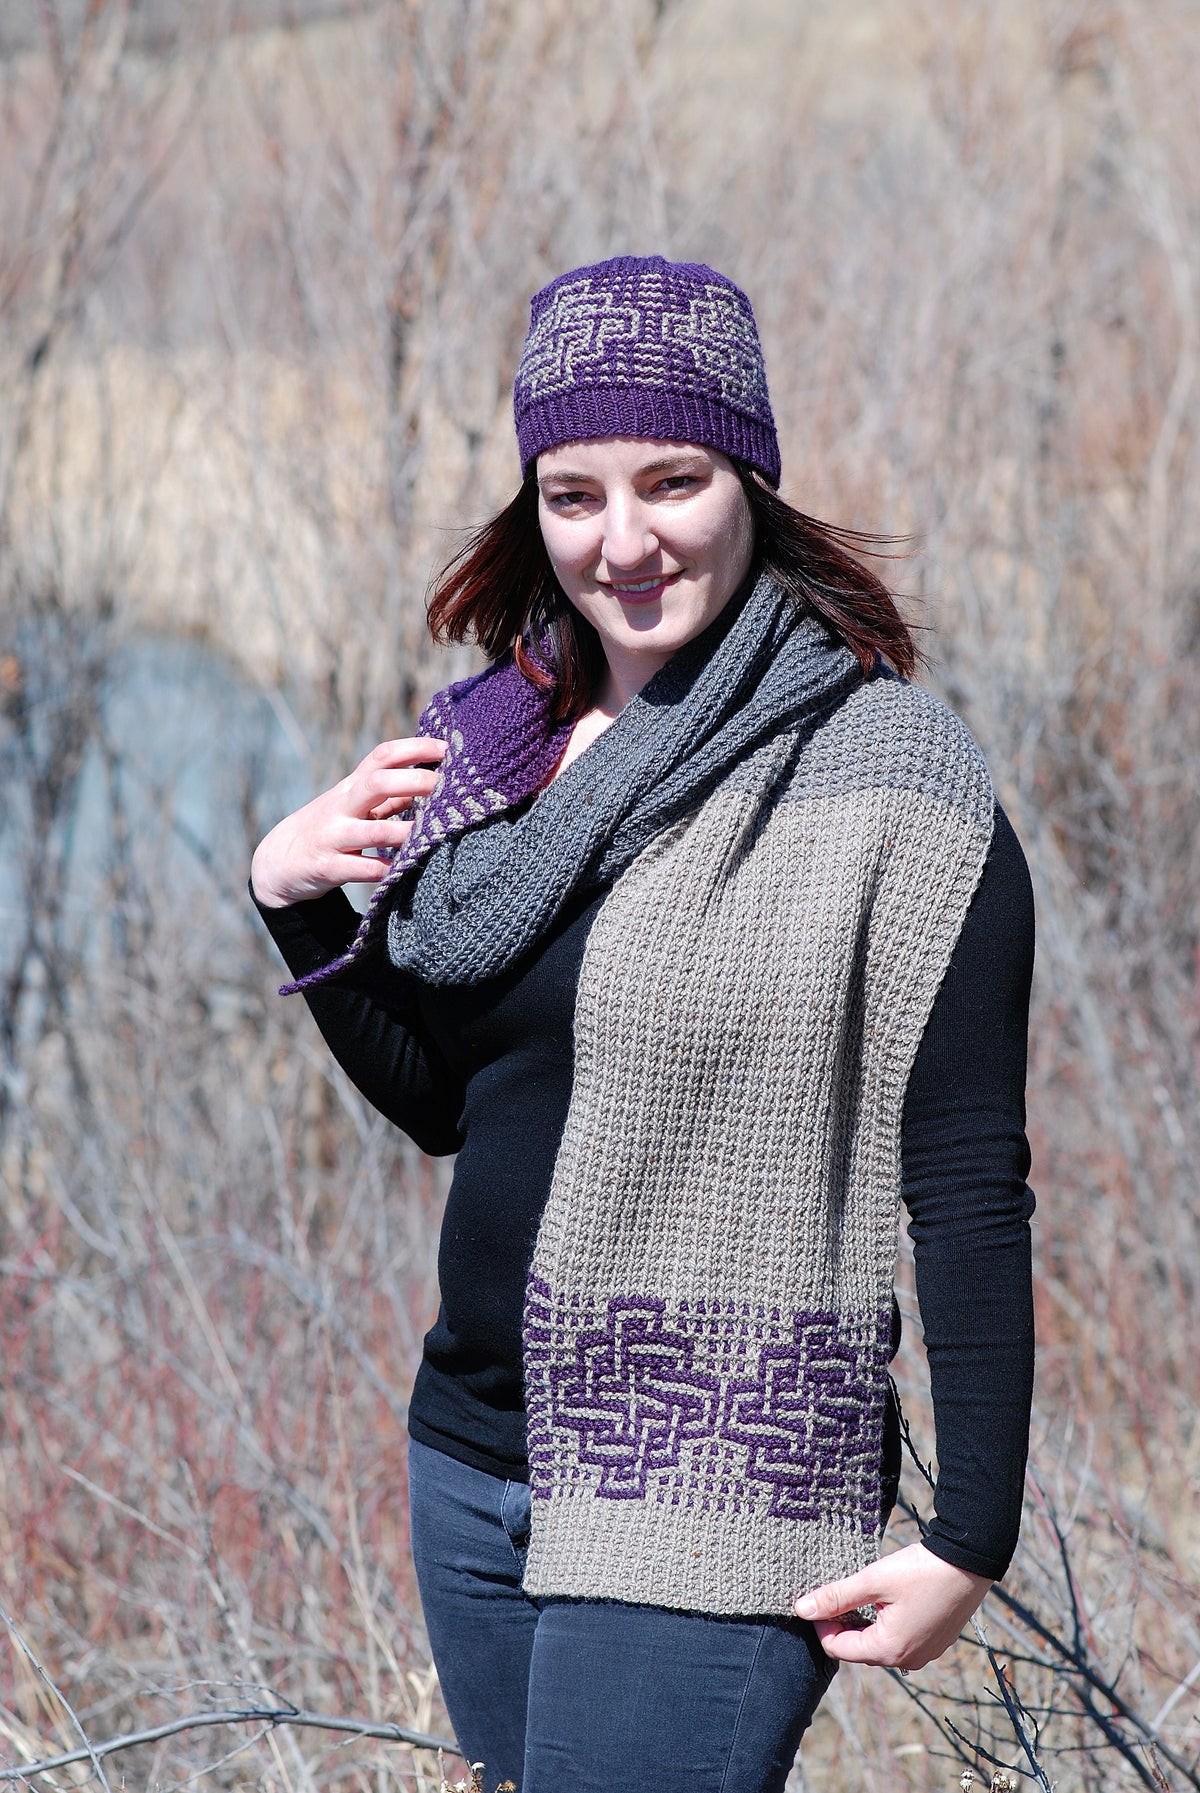 Mosaic Knot Scarf and Hat Pattern